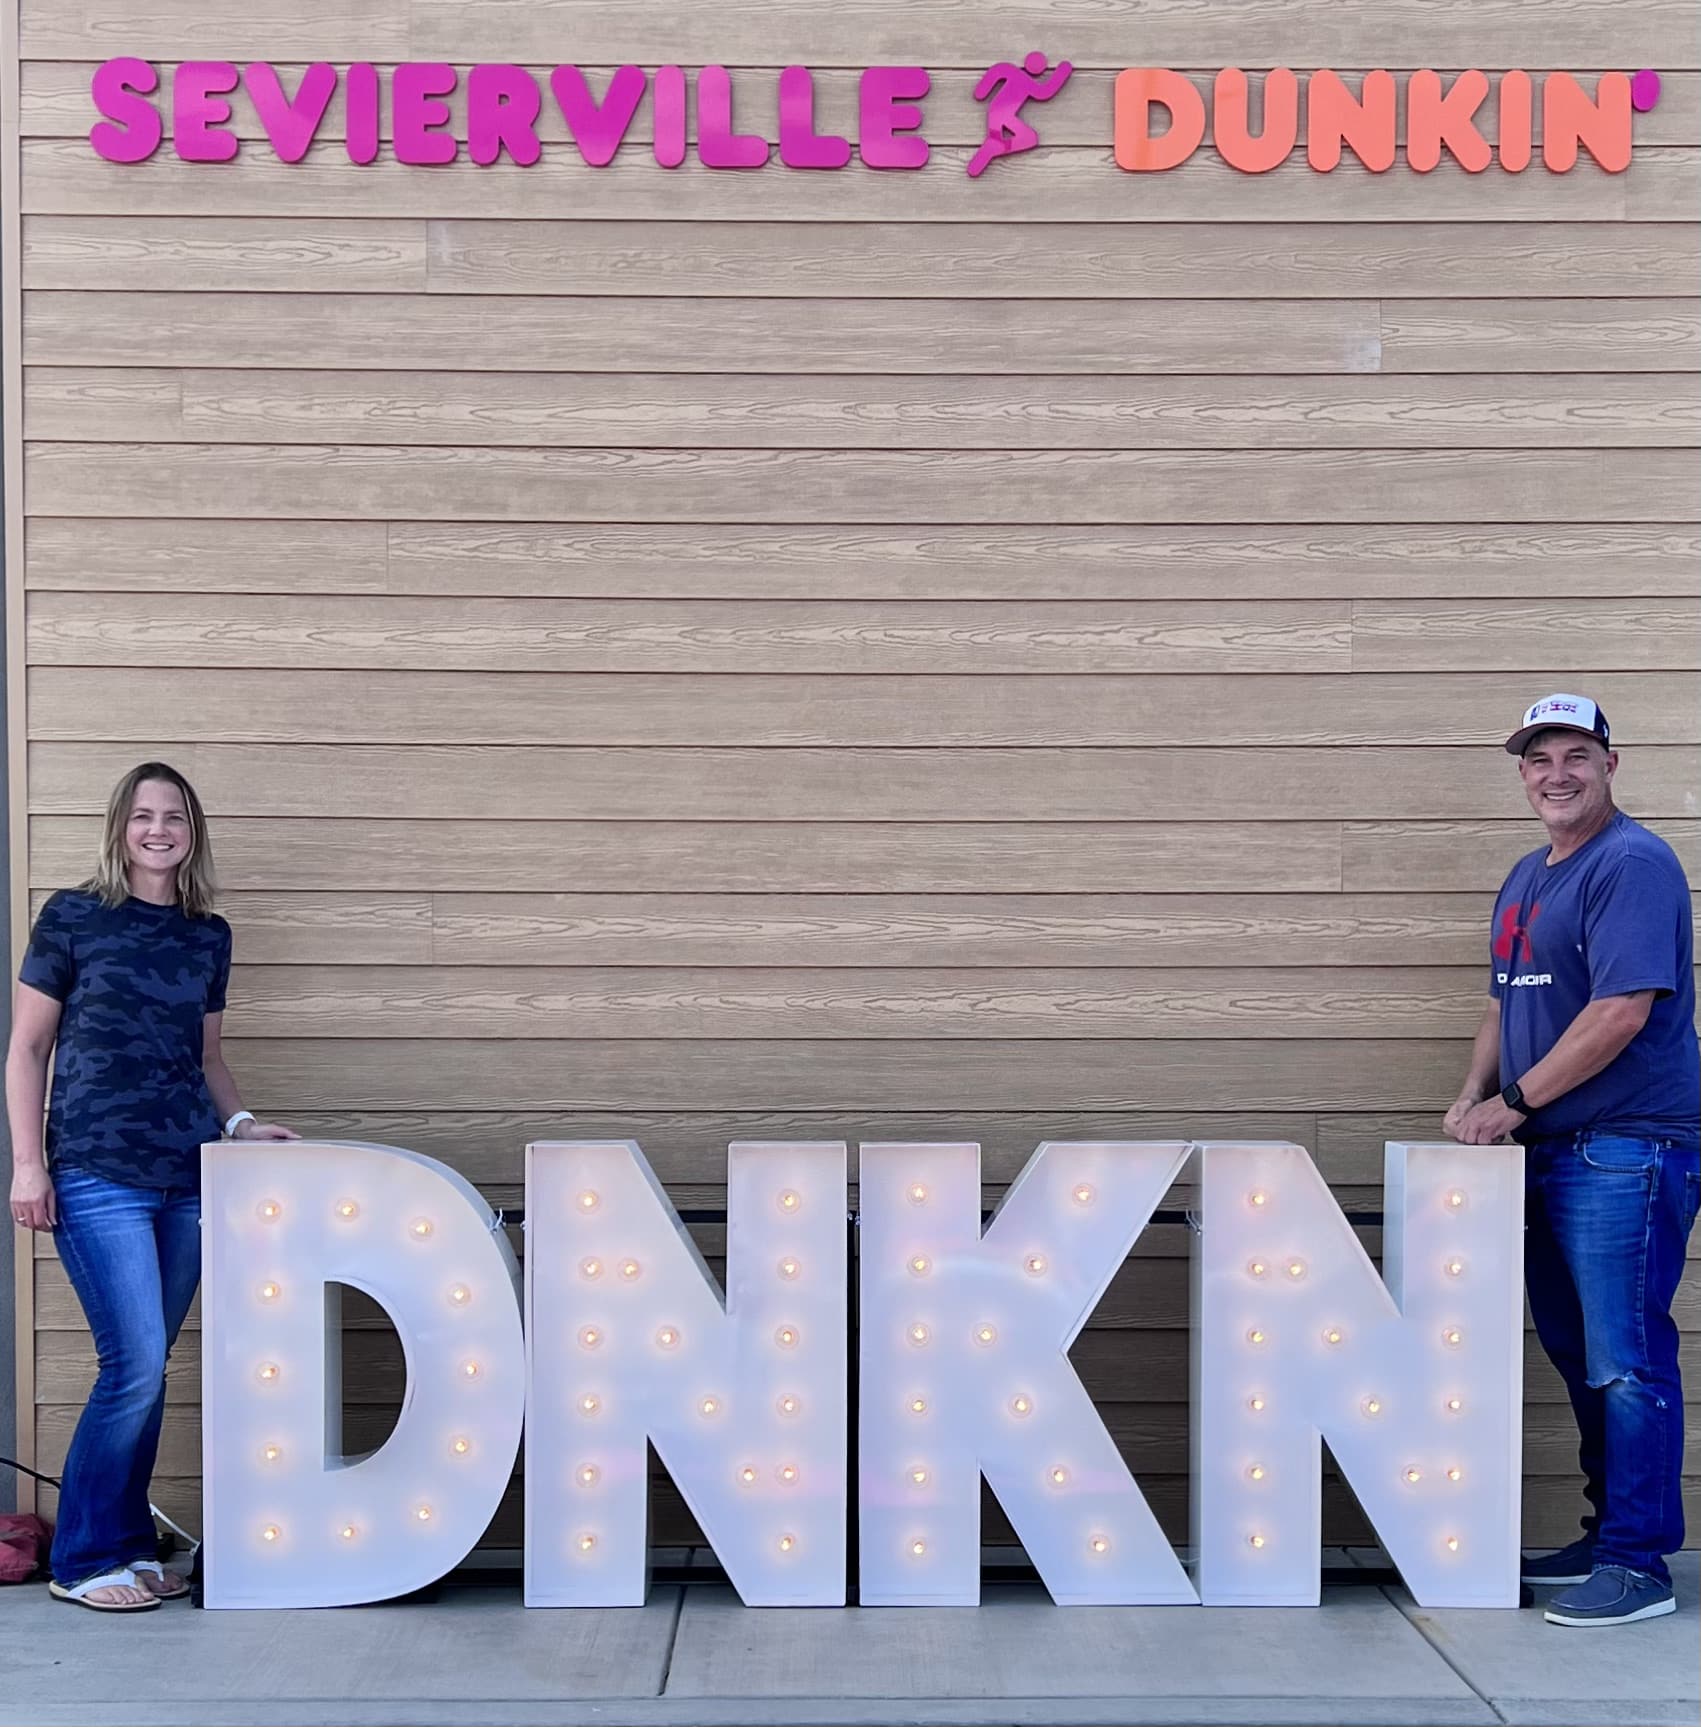 DNKN spelled out in front of a Dunkin Donuts